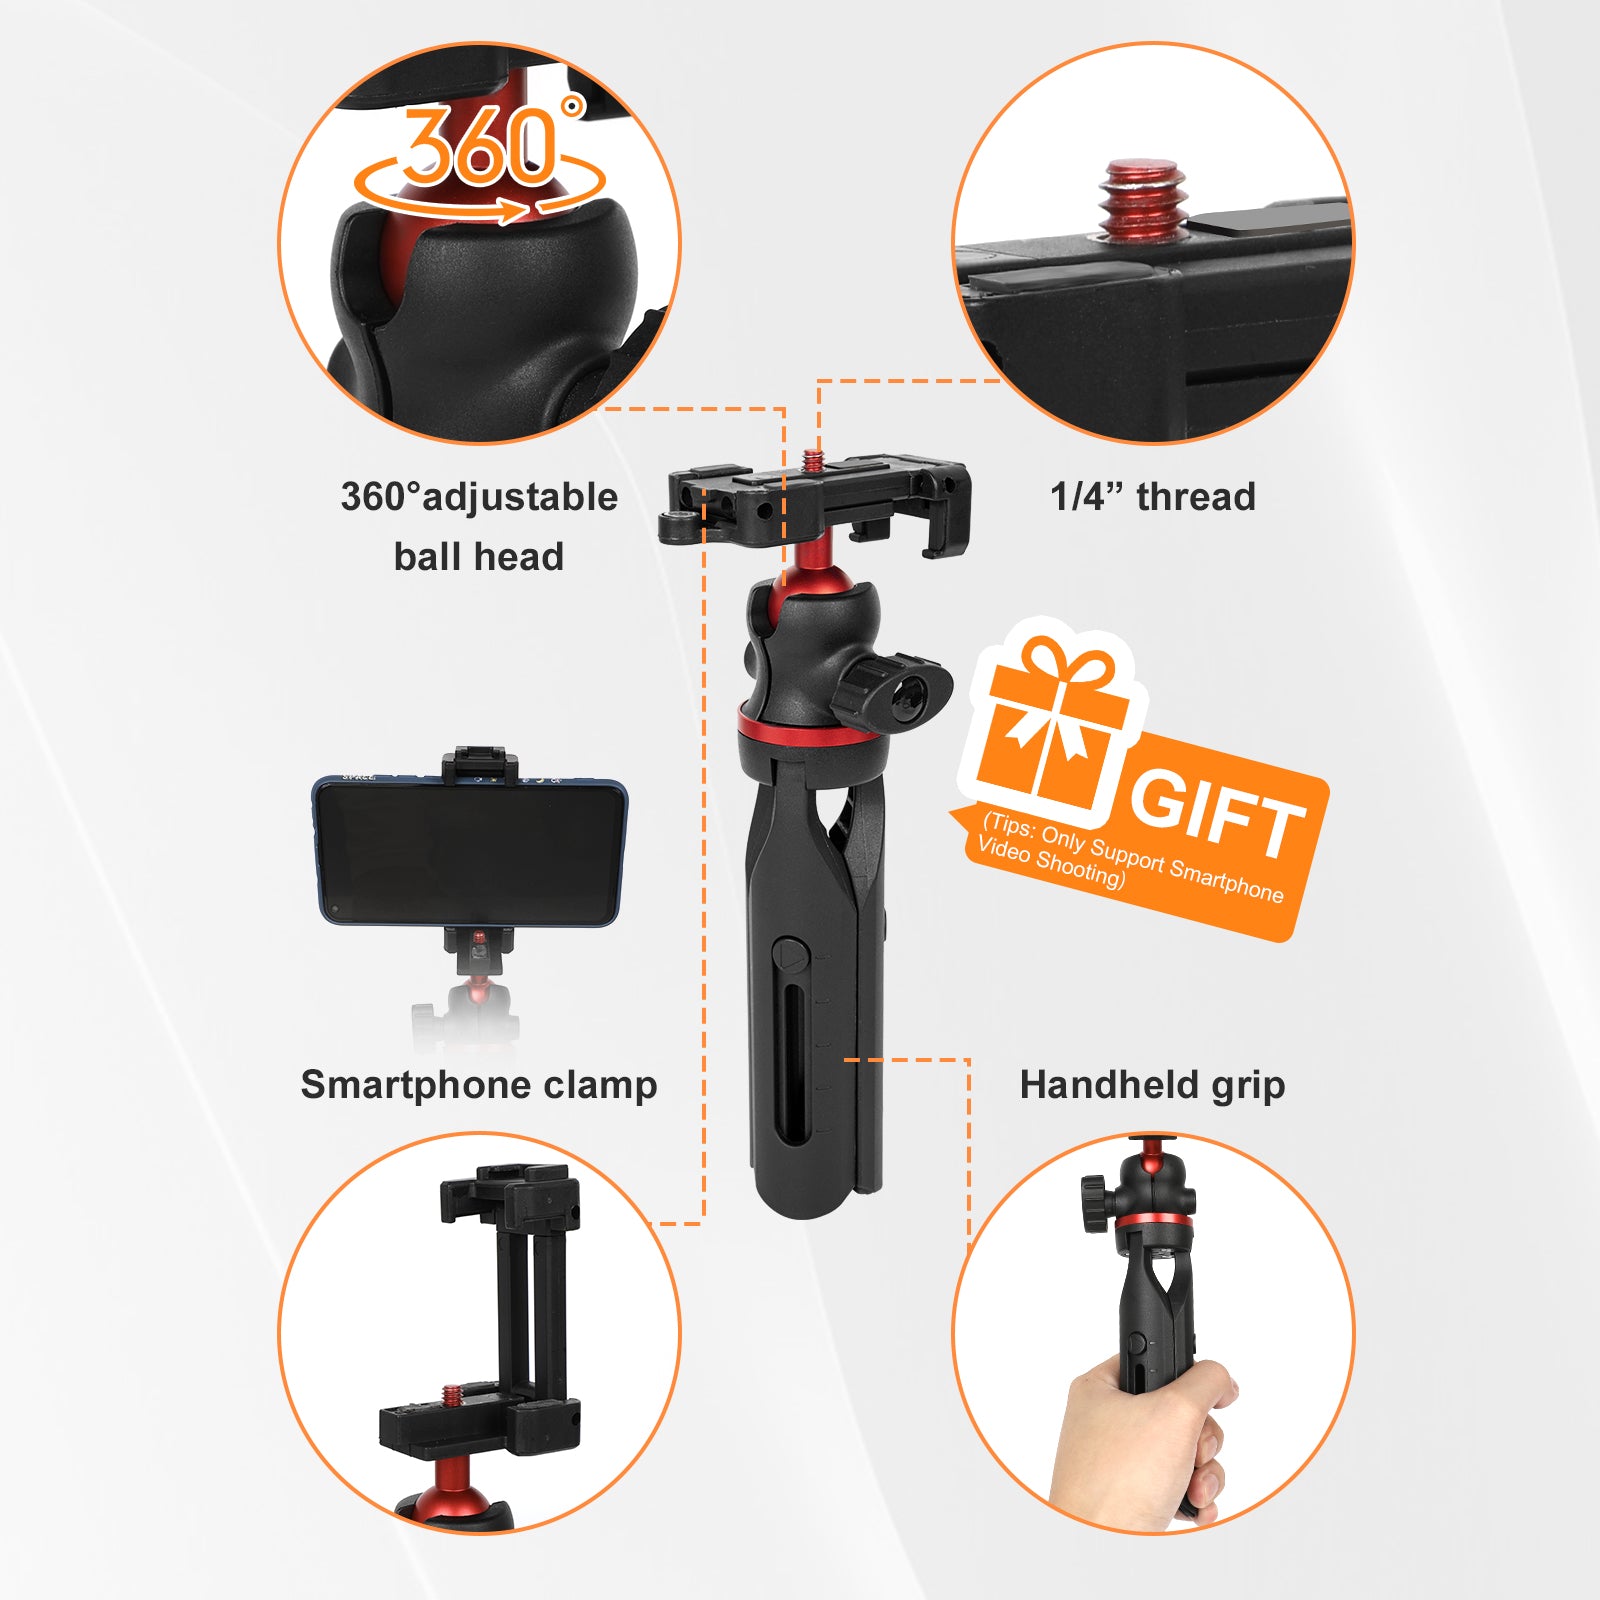 Moman MT2 includes a vlogging tripod kit with a 360° adjustable 1/4